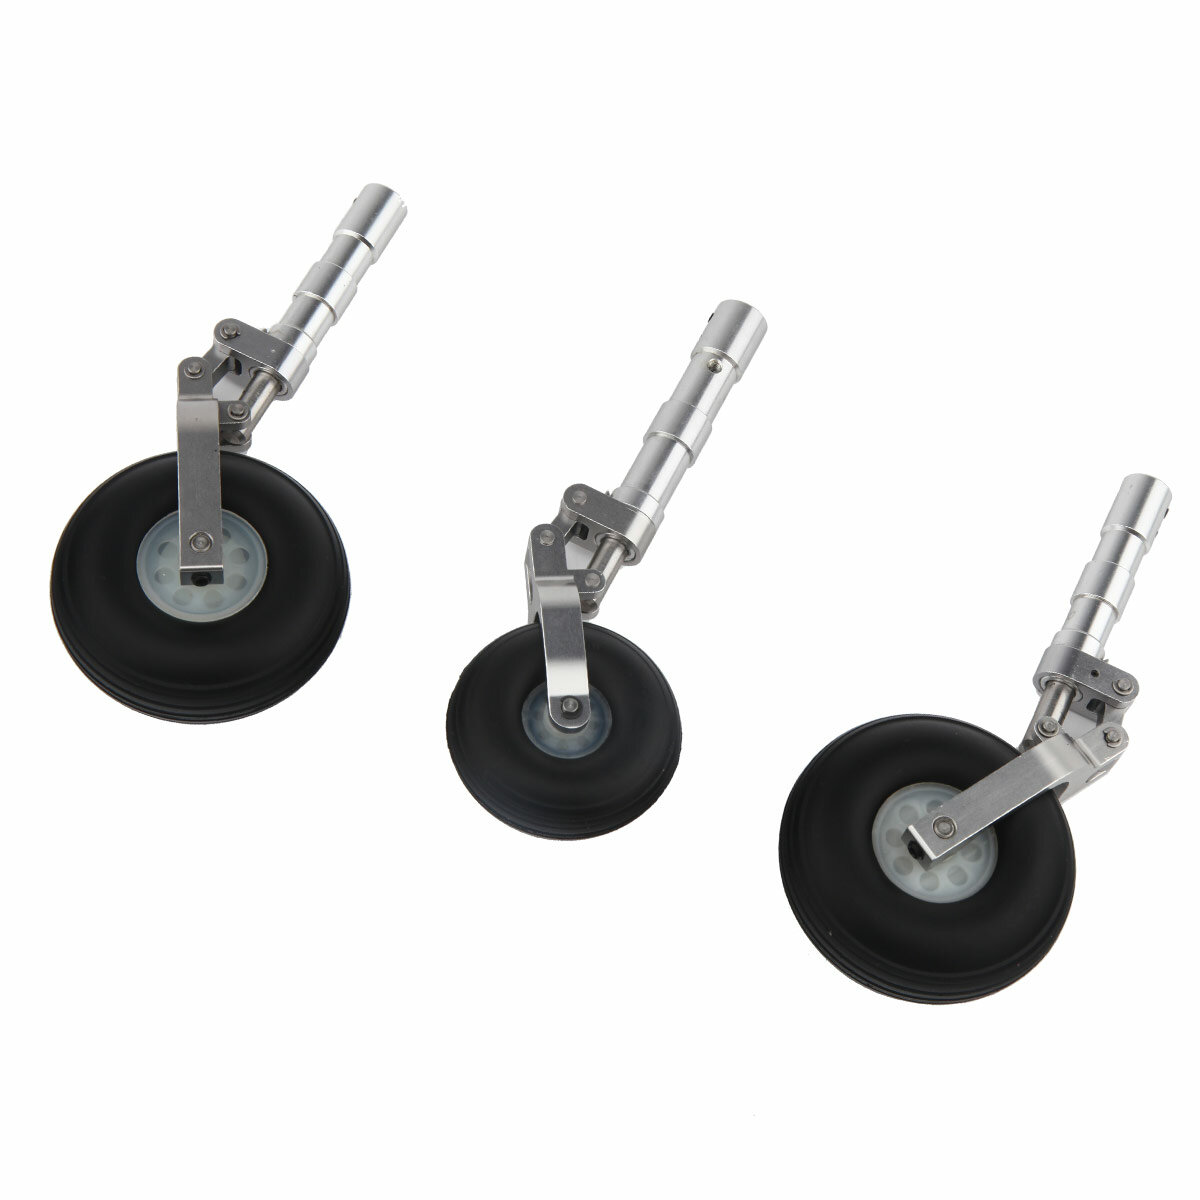 

3-piece Set Aluminium Alloy Anti-Vibration Landing Gear For Scale RC Airplane Shock Absorbing Aircraft Model Parts